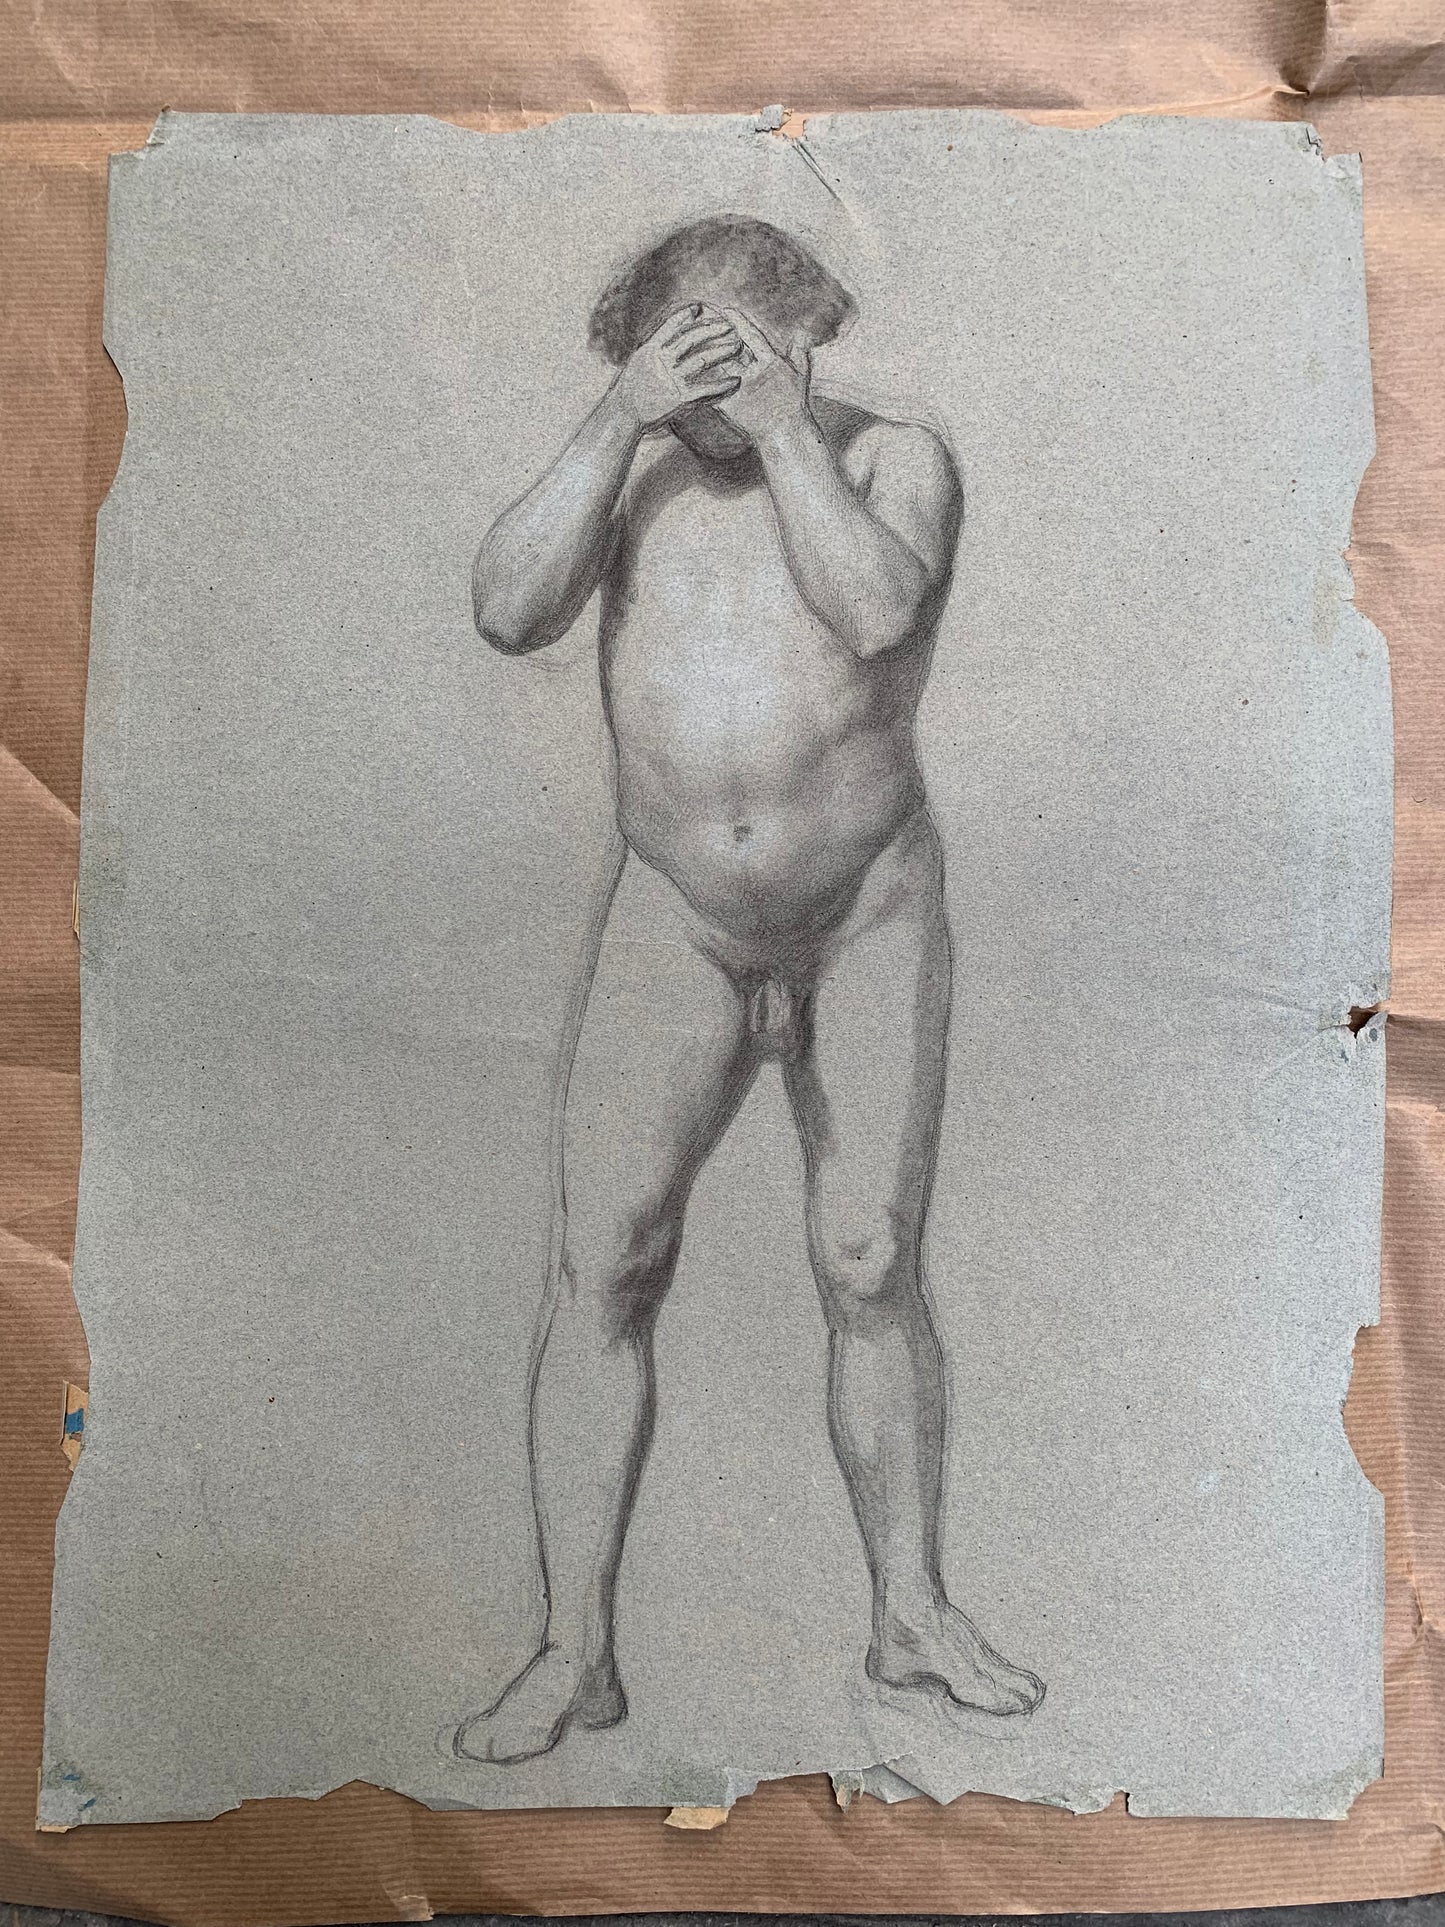 Preparatory anatomical study for the figure of a man with hands on his face.